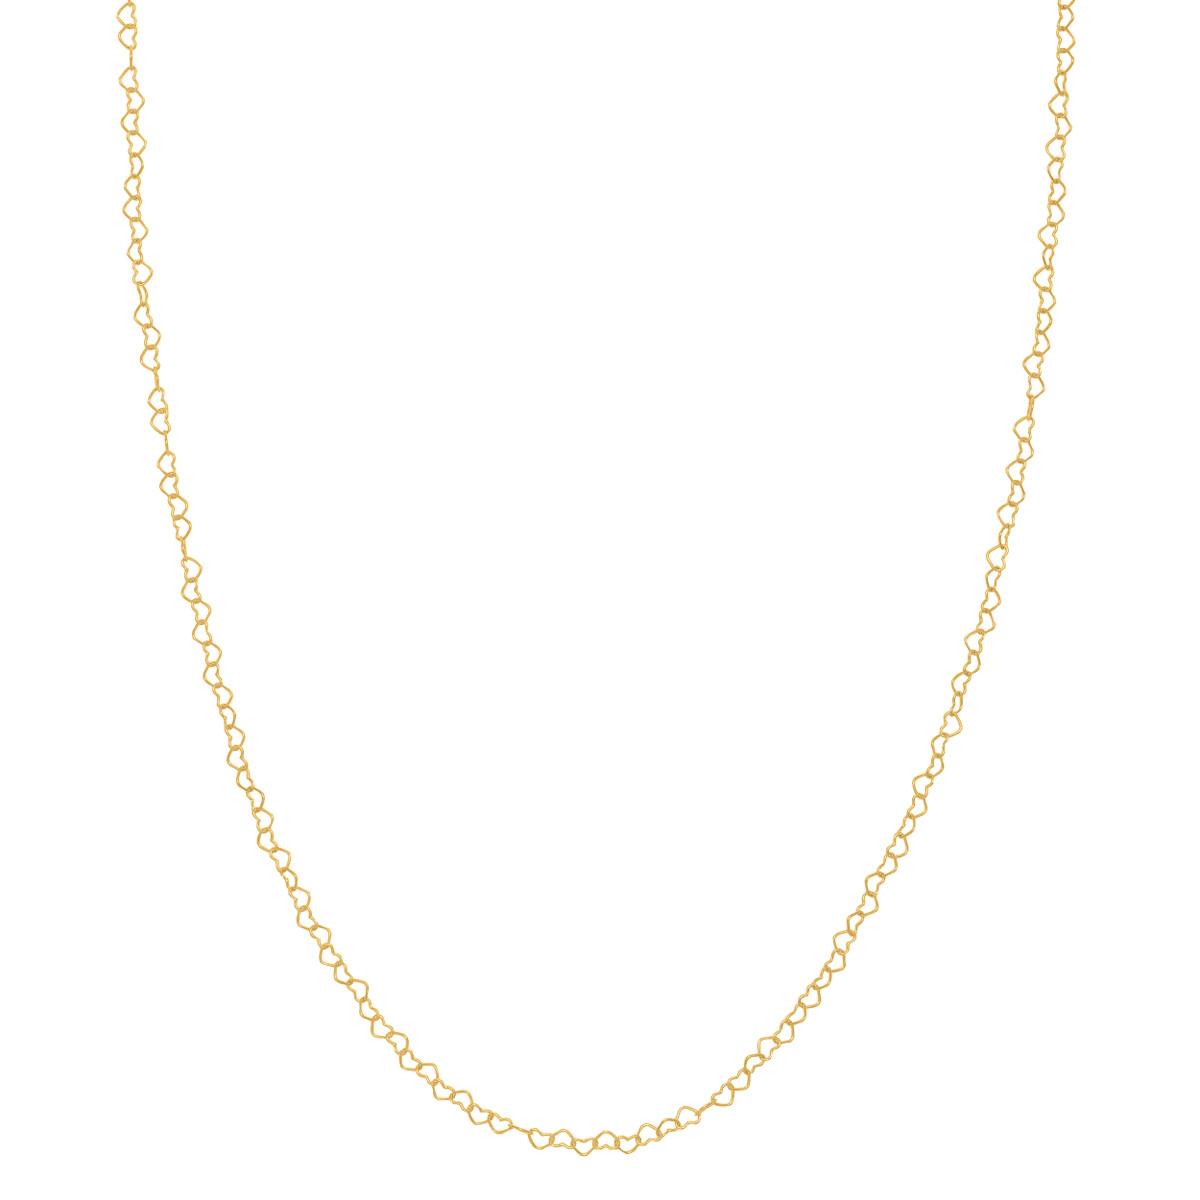 Hyde Park 14KT Yellow Gold Love Heart Chain Necklace-26808 Product Image